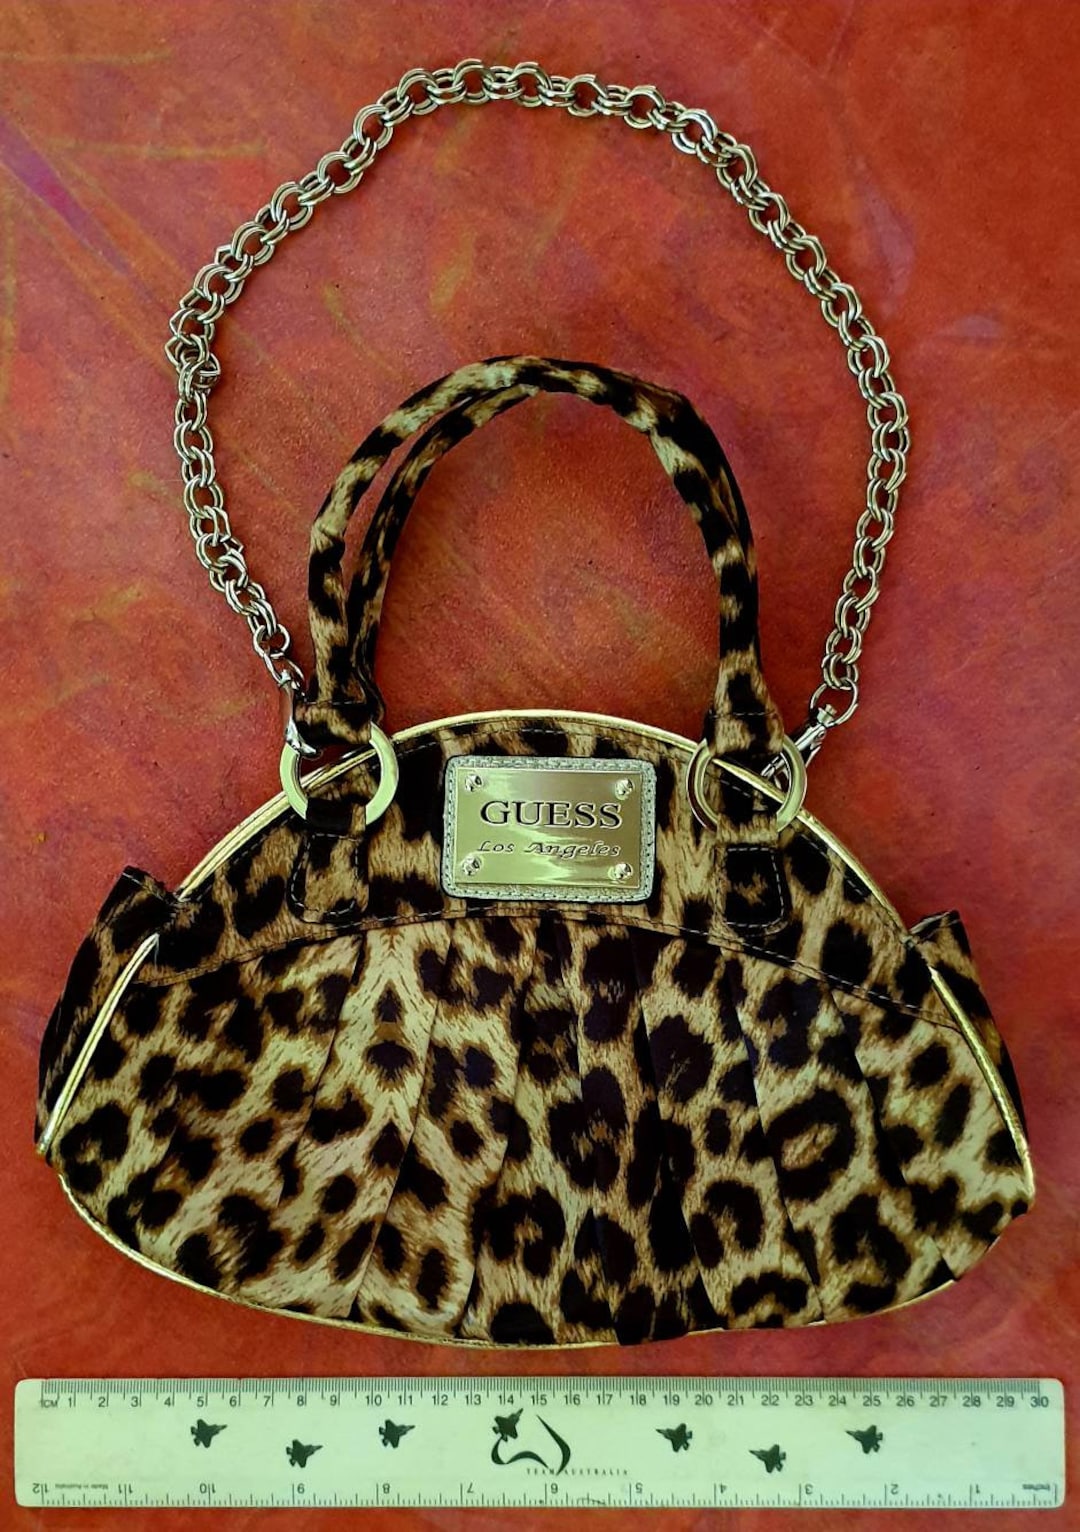 High Class by New Vintage Handbags